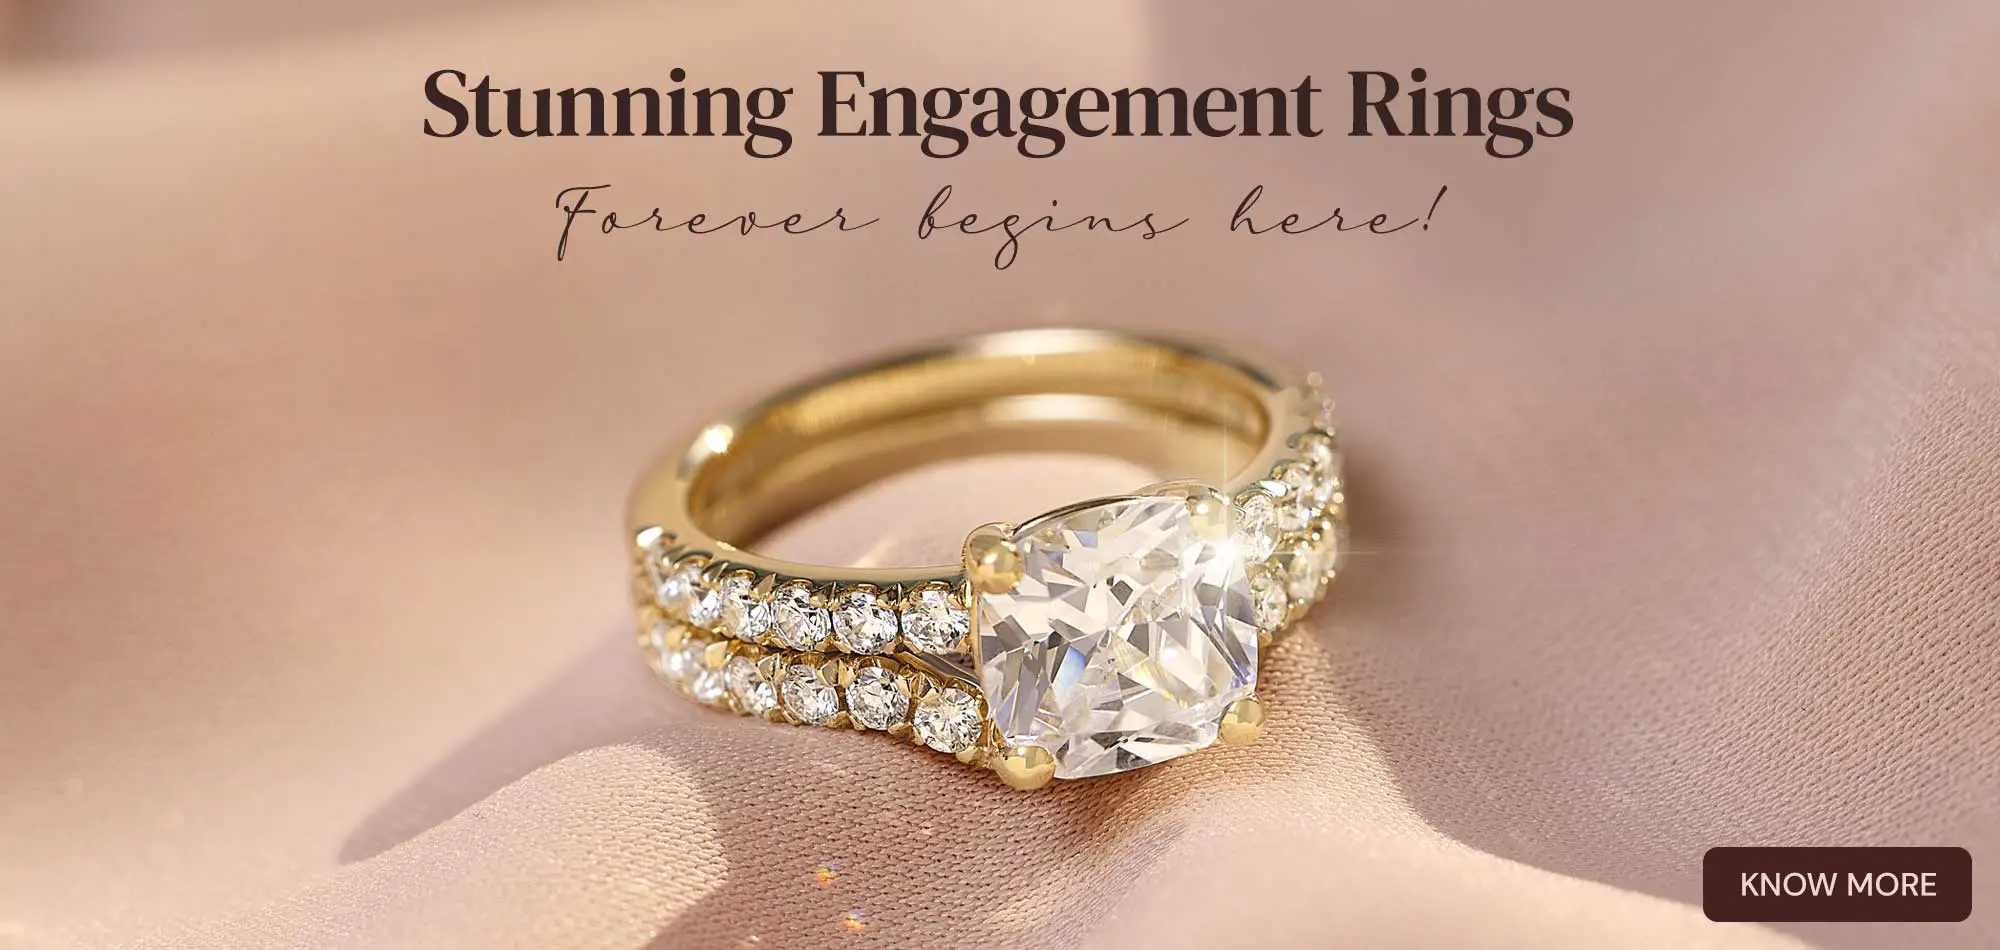 Stunning Engagement Rings at M and M Jewelers